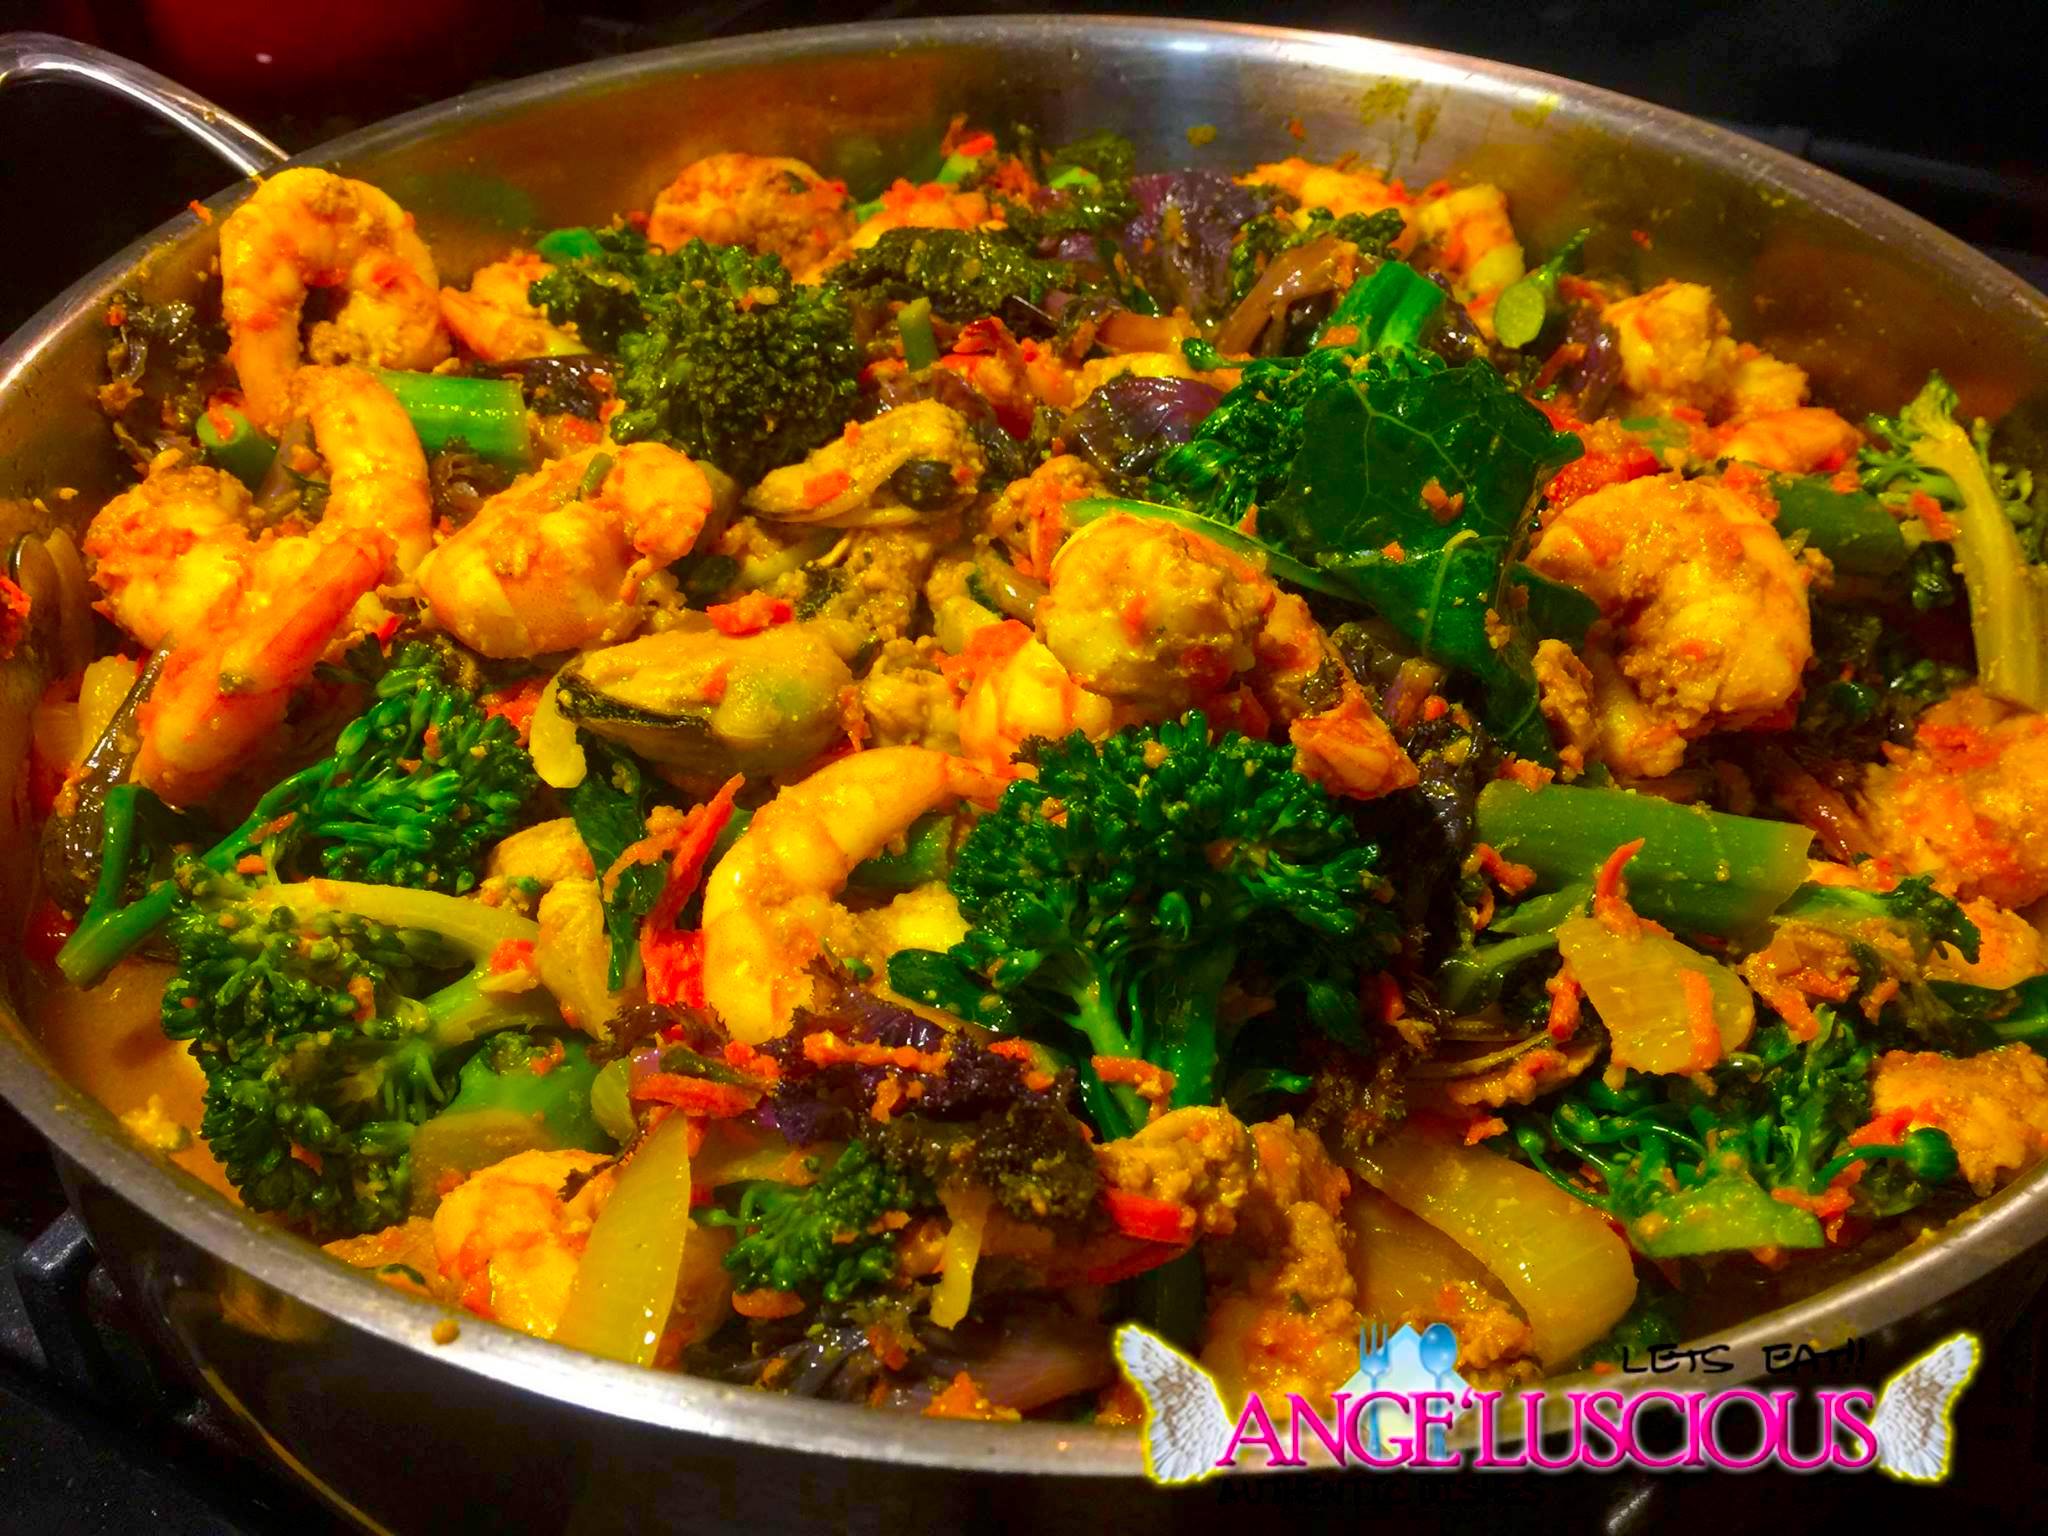 Curry Shrimp And Mussels With Flowering Kale And Broccolette Angeluscious,Vegan Burger Recipe